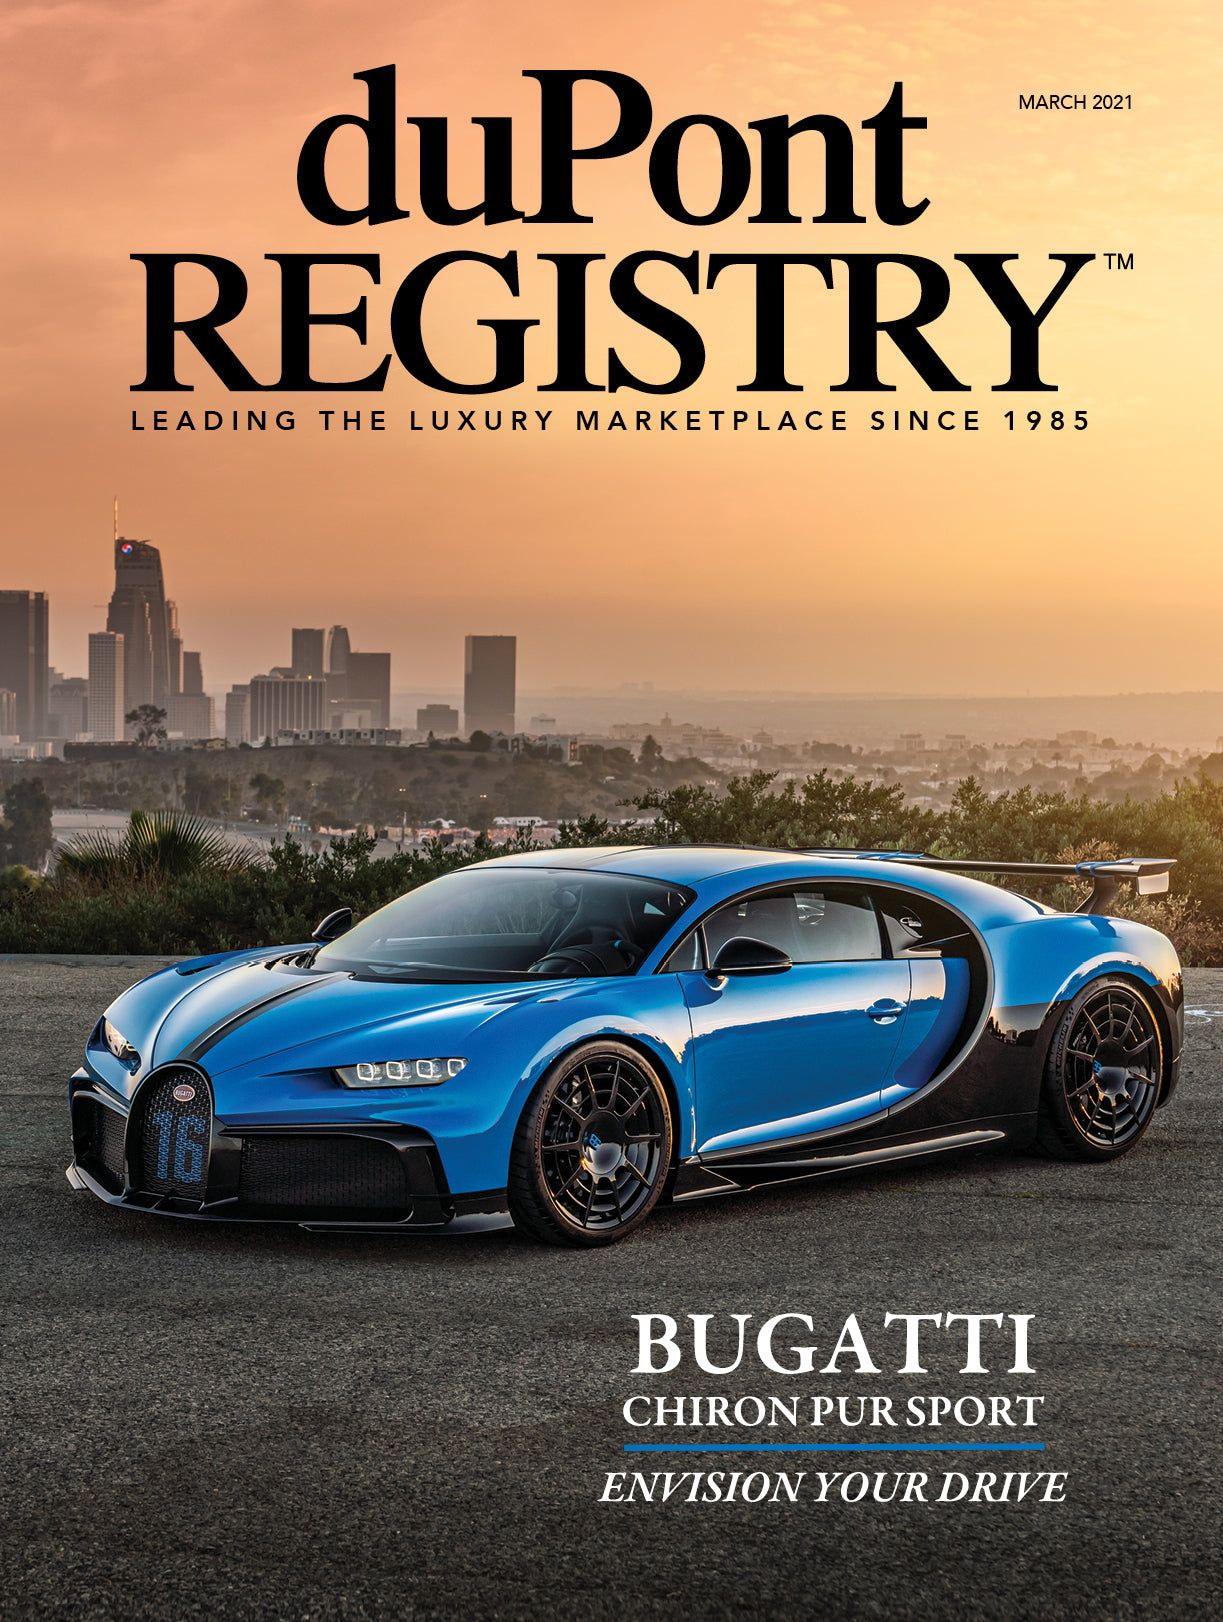 duPont REGISTRY March 2021